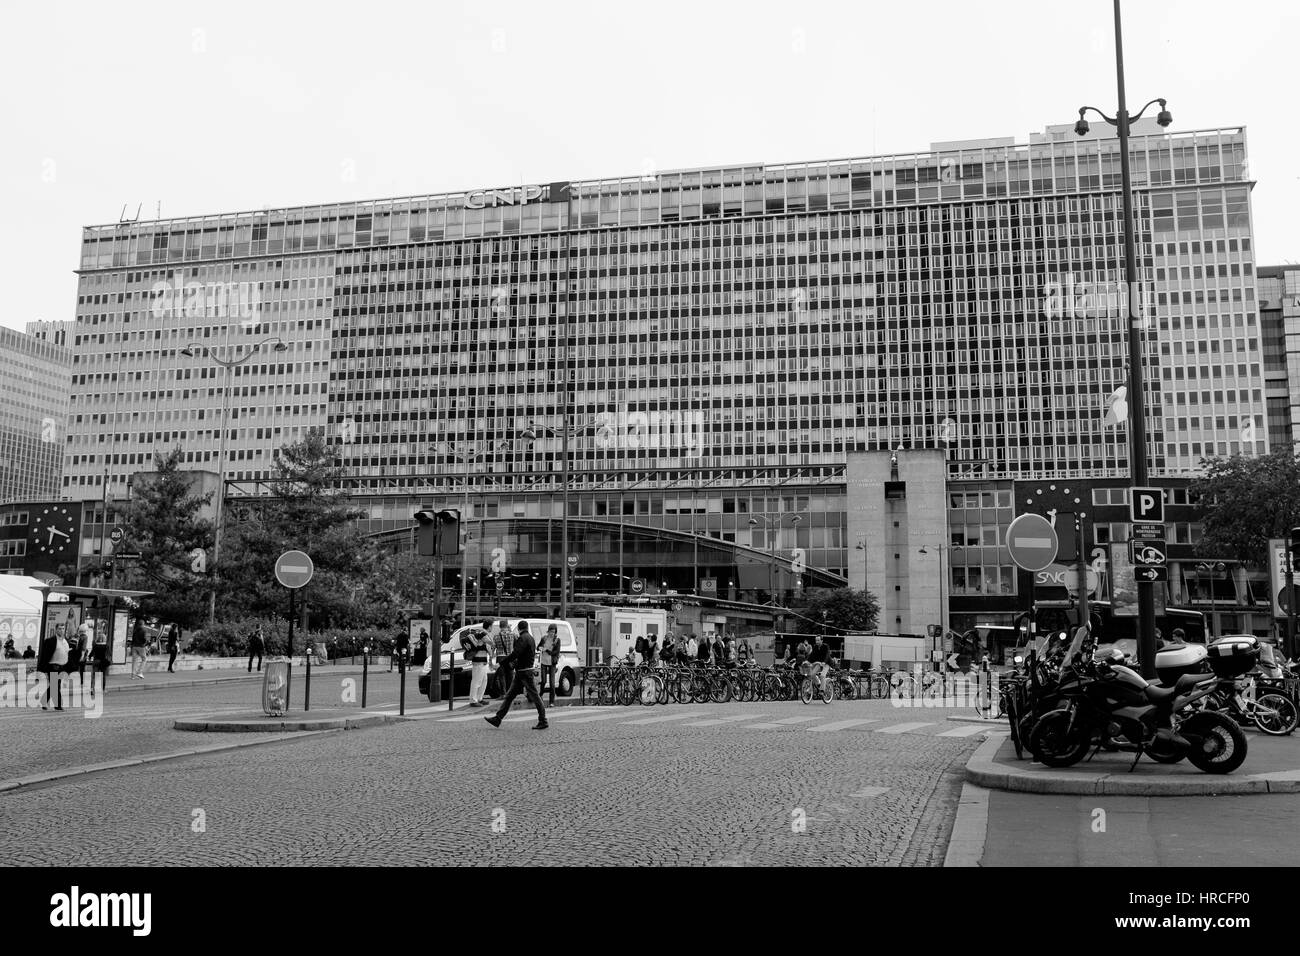 Grayscale image of Gare Montparnasse railway terminal from street level - Paris, France Stock Photo